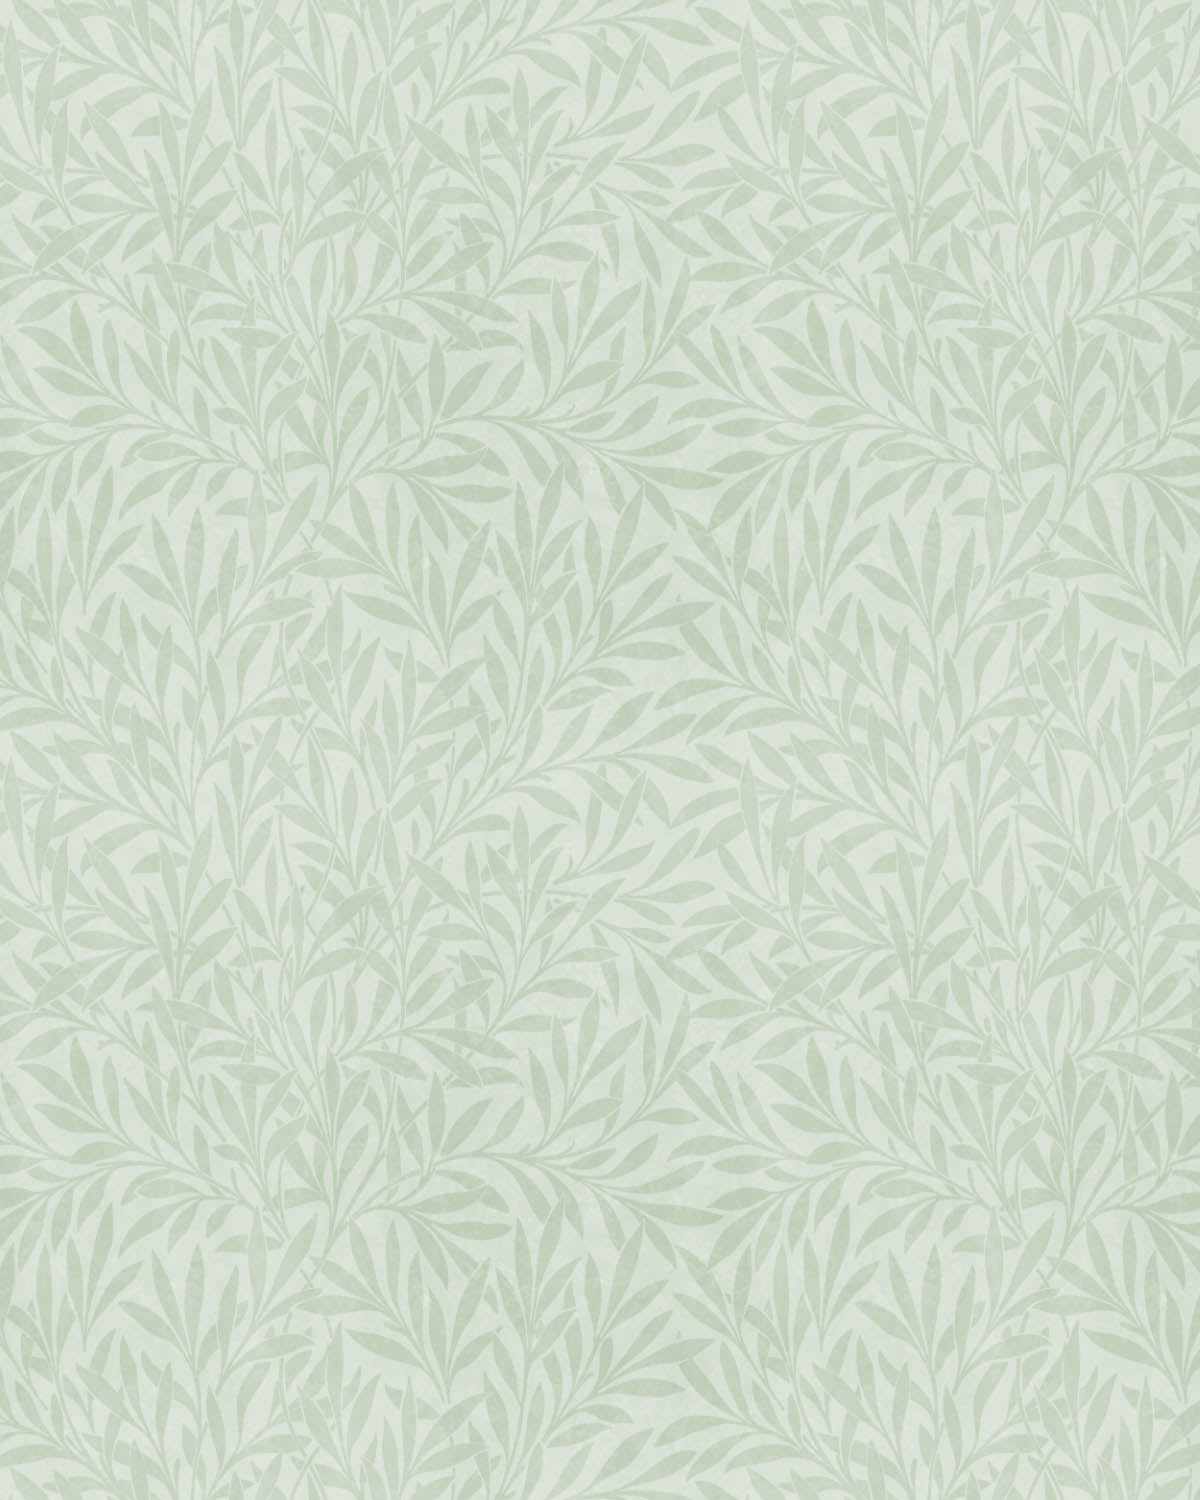 52 Sage Green Aesthetic Wallpaper Backgrounds  Restore Decor  More